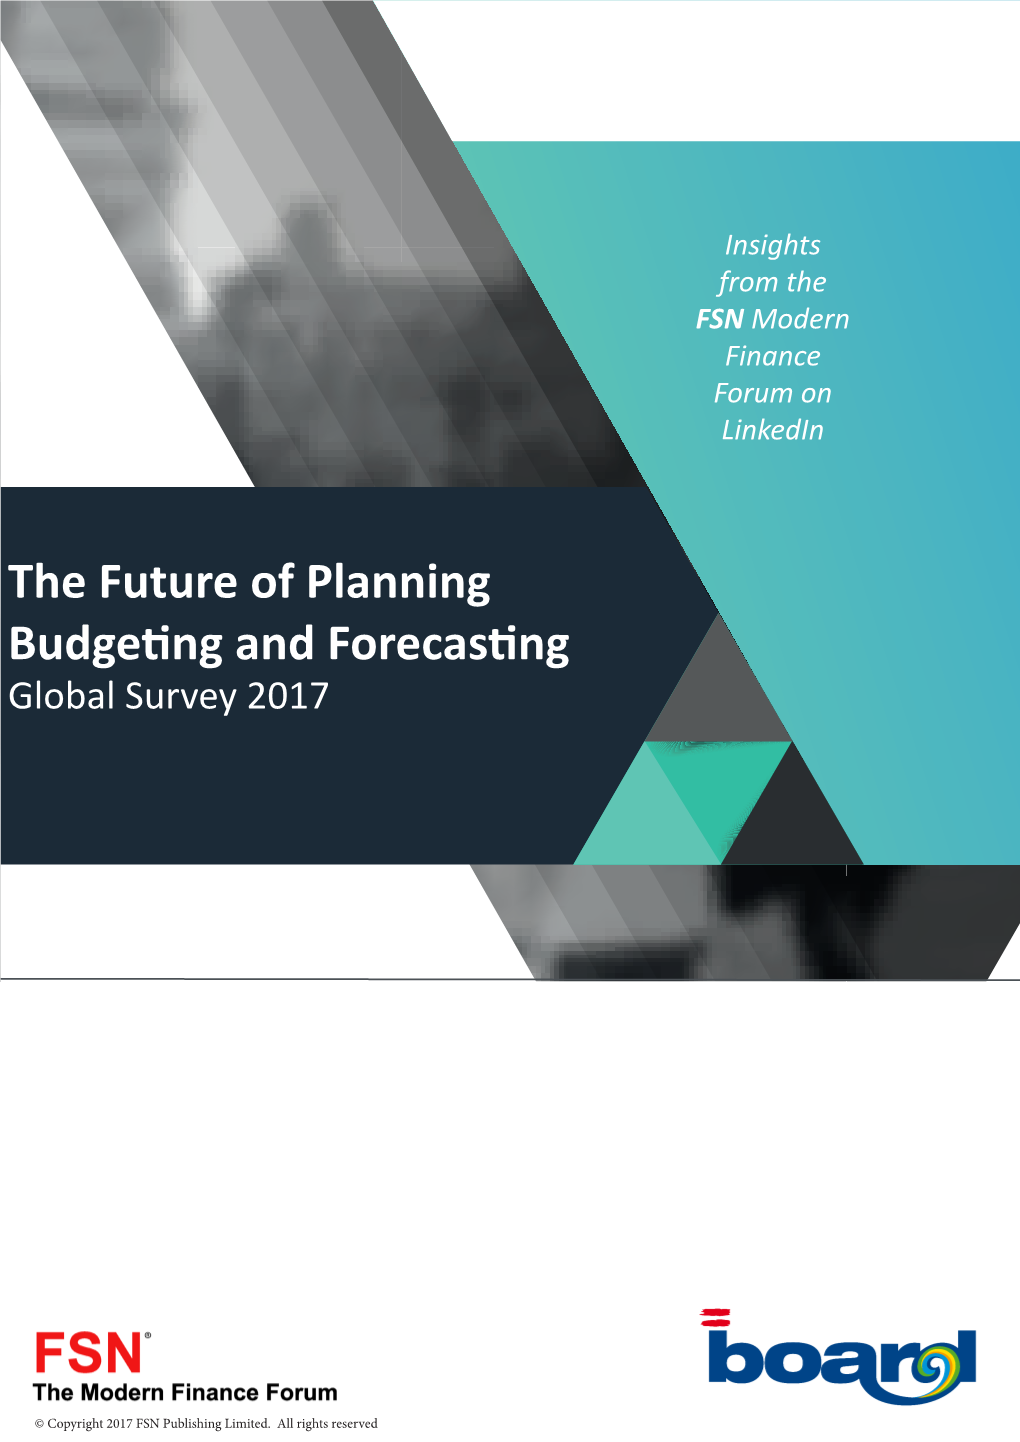 The Future of Planning Budgeting and Forecasting Global Survey 2017